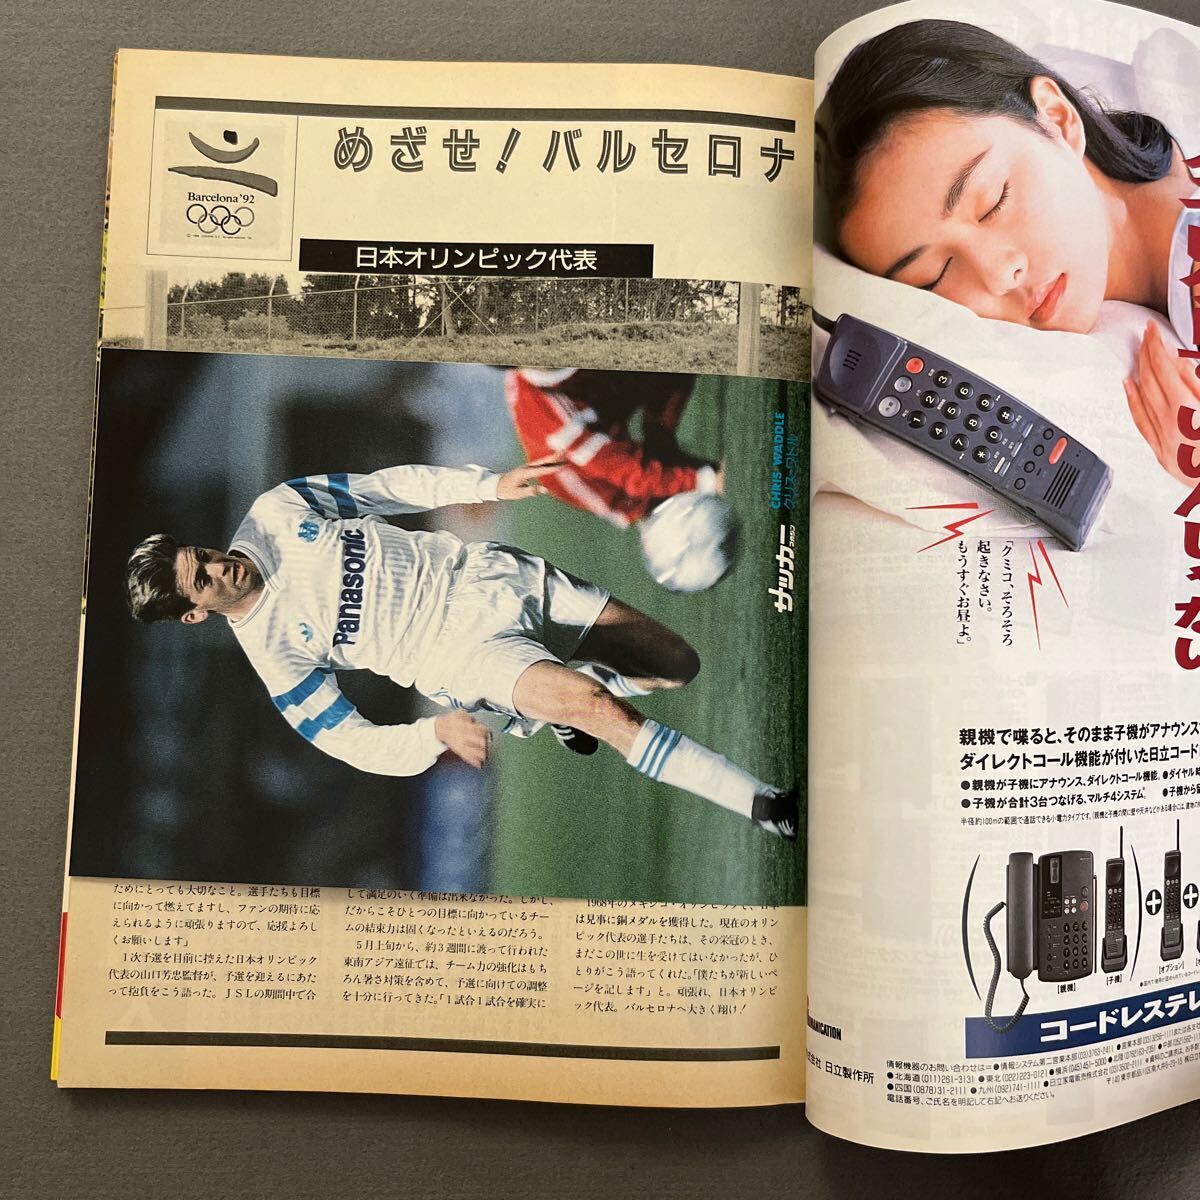  soccer magazine 7 month number * Heisei era 3 year 7 month 1 day issue *No.387* Marseille *JSL* Japan Olympic representative * tuck seal * Chris *wa dollar 